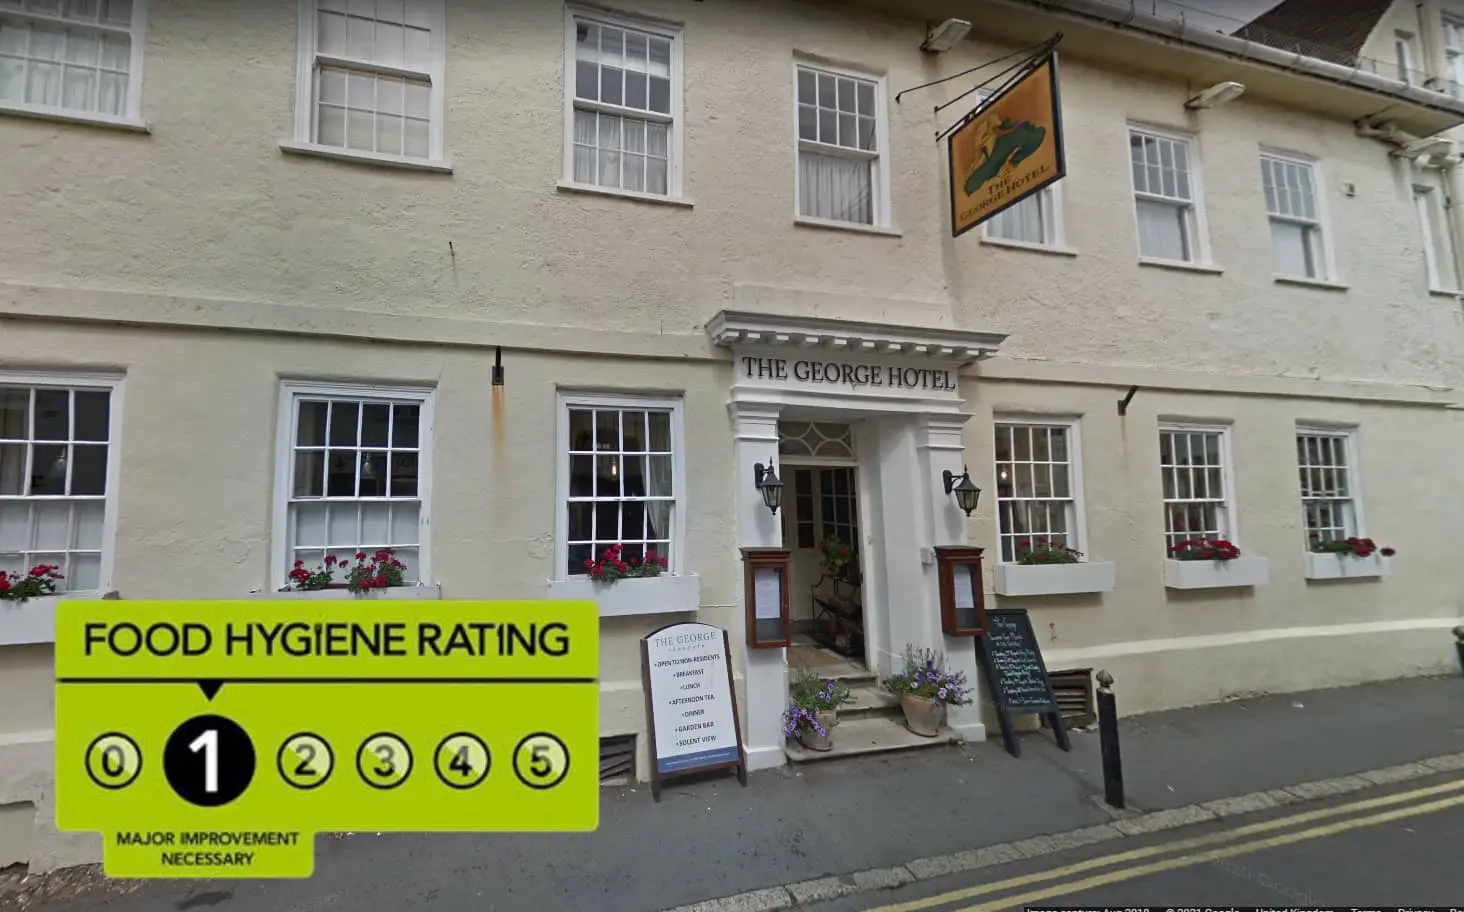 he George Hotel - Google Street Map with FSA rating